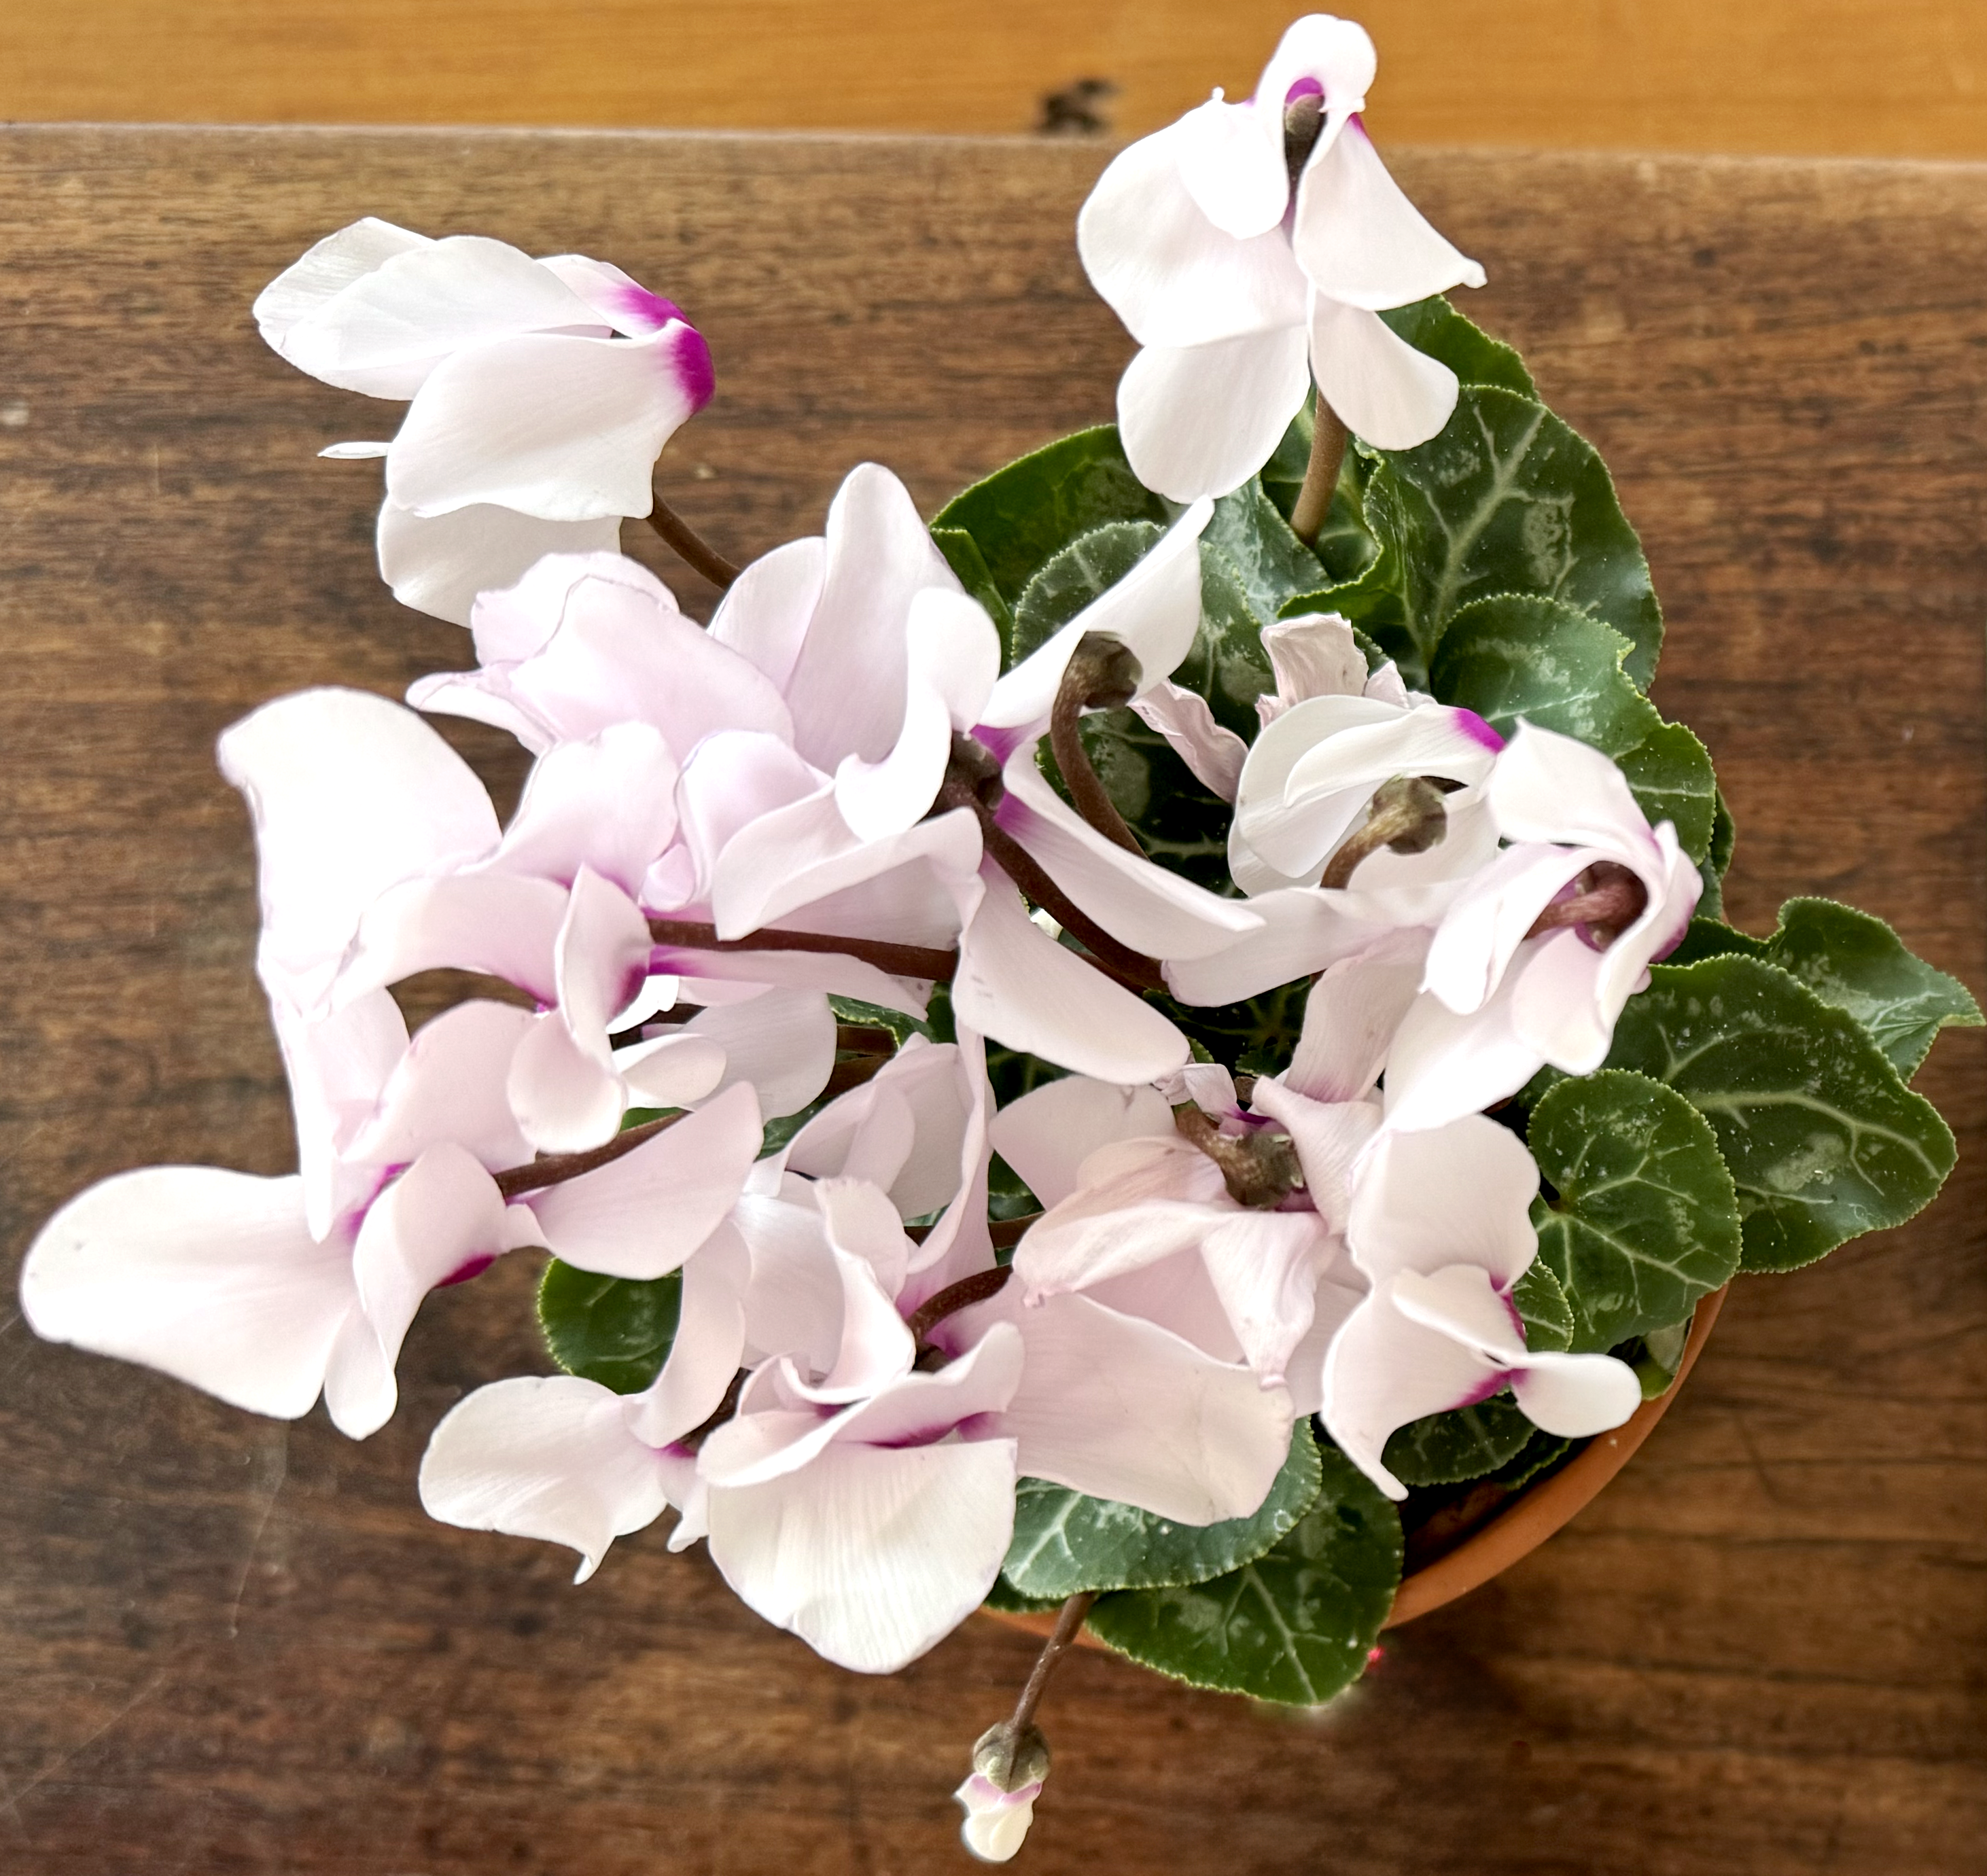 A potted cyclamen plant with pink petals